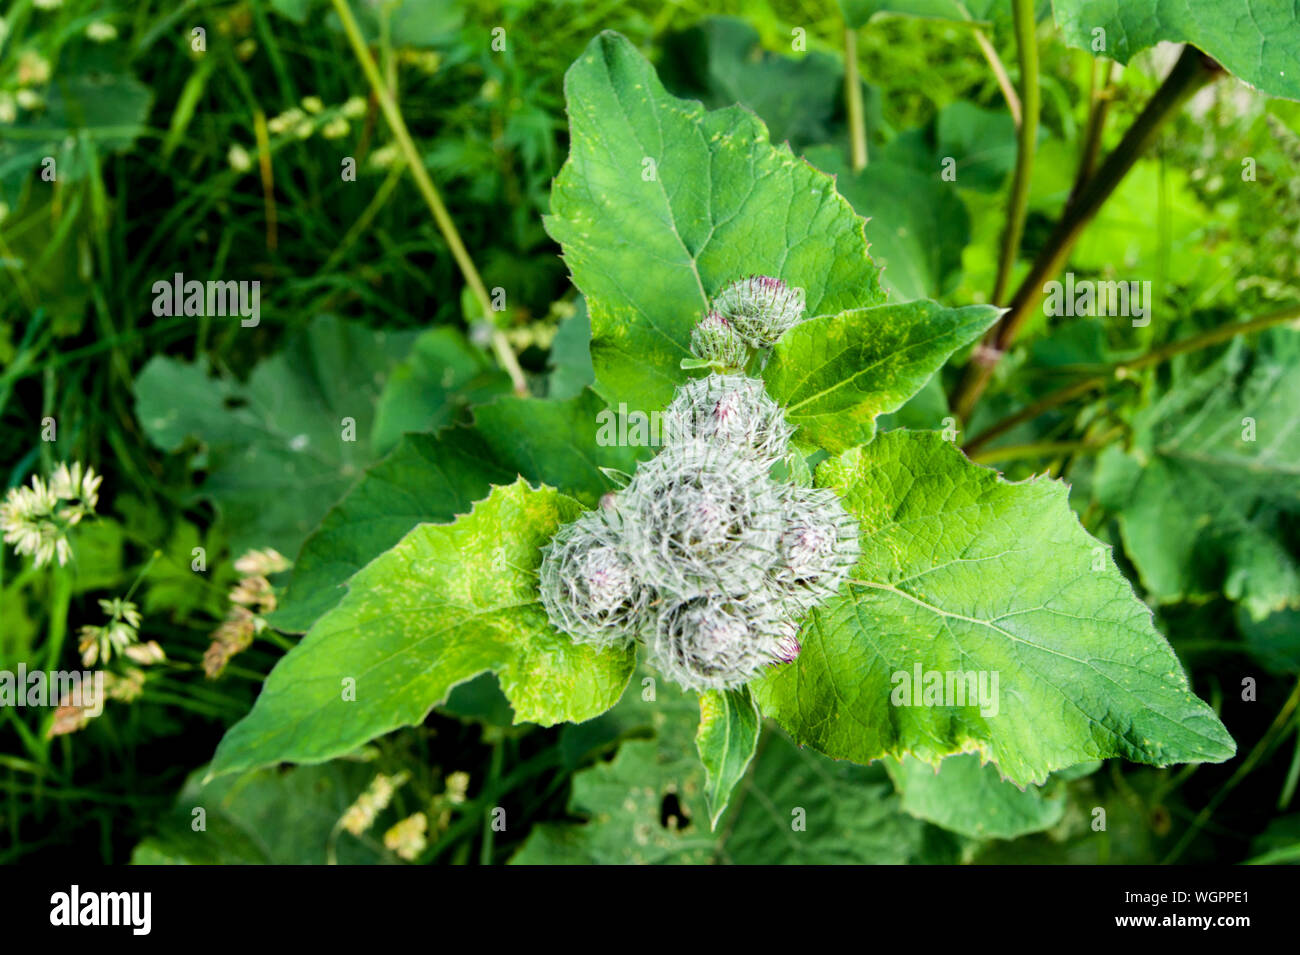 Useful plants. Burdock. Burdock bush with leaves and spines. Green. Flowers Stock Photo